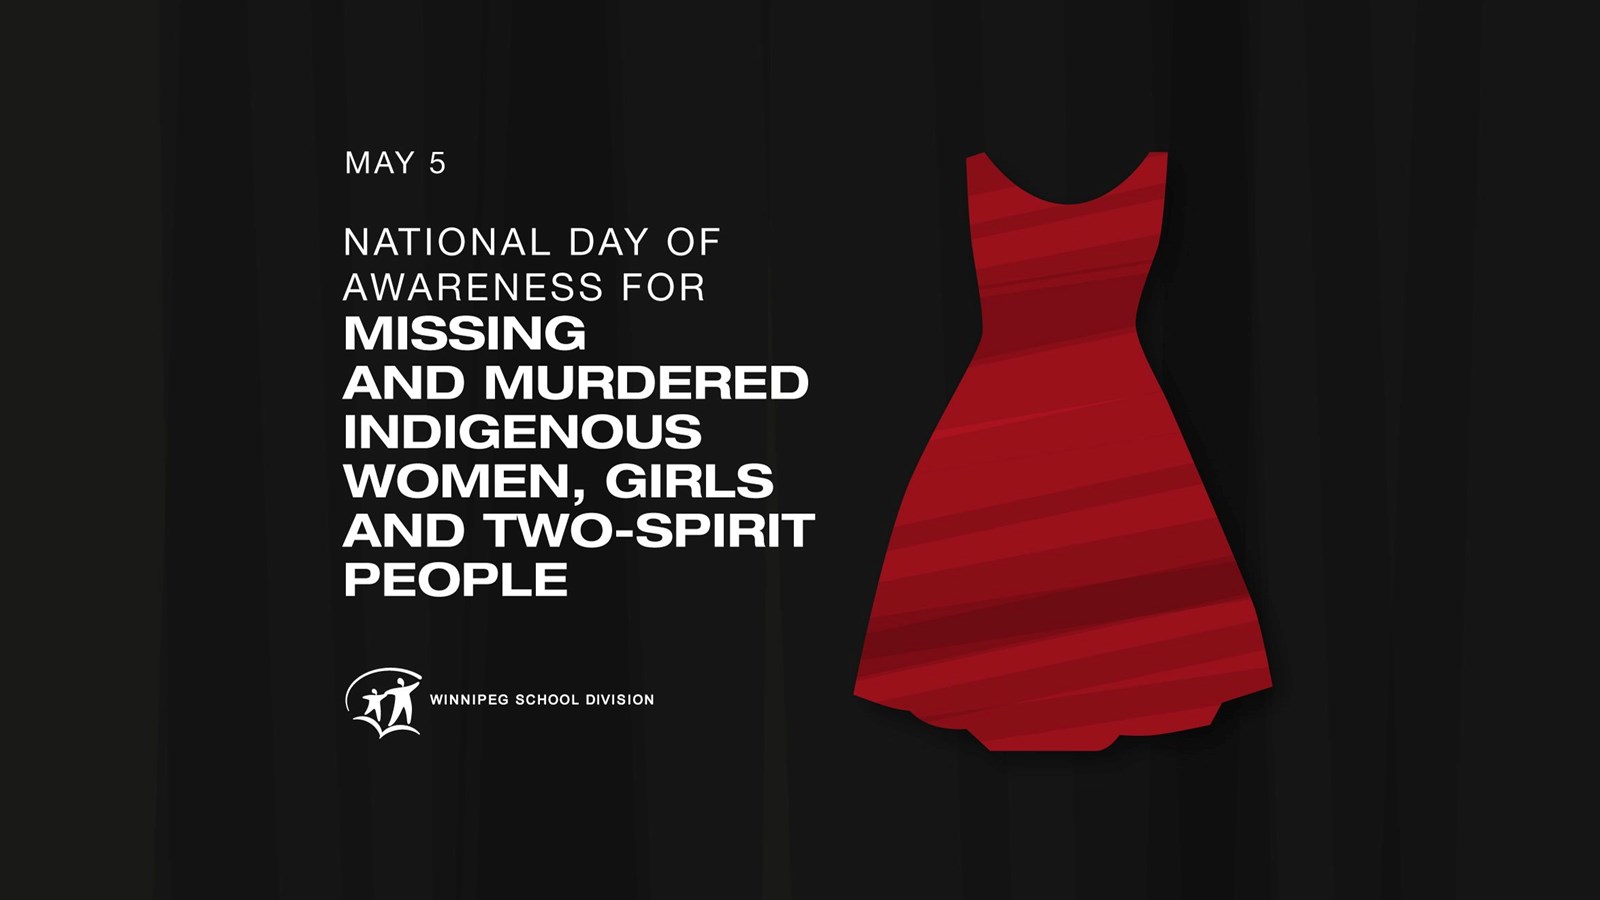 WSD schools bring awareness of missing and murdered Indigenous women